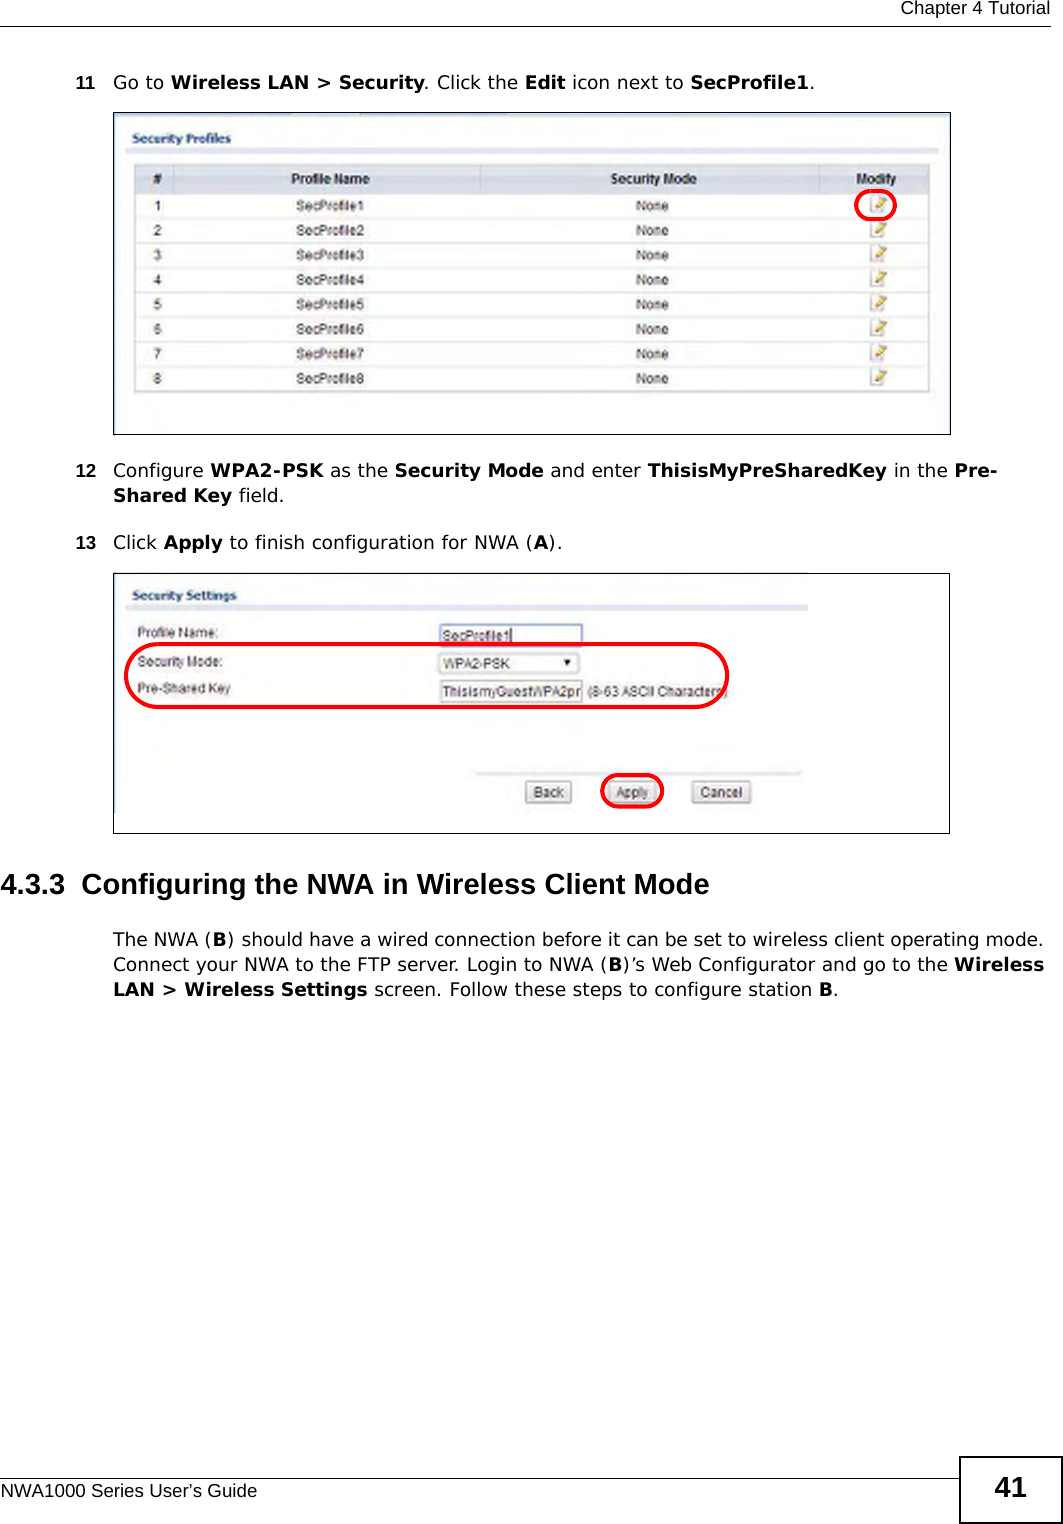  Chapter 4 TutorialNWA1000 Series User’s Guide 4111 Go to Wireless LAN &gt; Security. Click the Edit icon next to SecProfile1. 12 Configure WPA2-PSK as the Security Mode and enter ThisisMyPreSharedKey in the Pre-Shared Key field.13 Click Apply to finish configuration for NWA (A). 4.3.3  Configuring the NWA in Wireless Client ModeThe NWA (B) should have a wired connection before it can be set to wireless client operating mode. Connect your NWA to the FTP server. Login to NWA (B)’s Web Configurator and go to the Wireless LAN &gt; Wireless Settings screen. Follow these steps to configure station B.